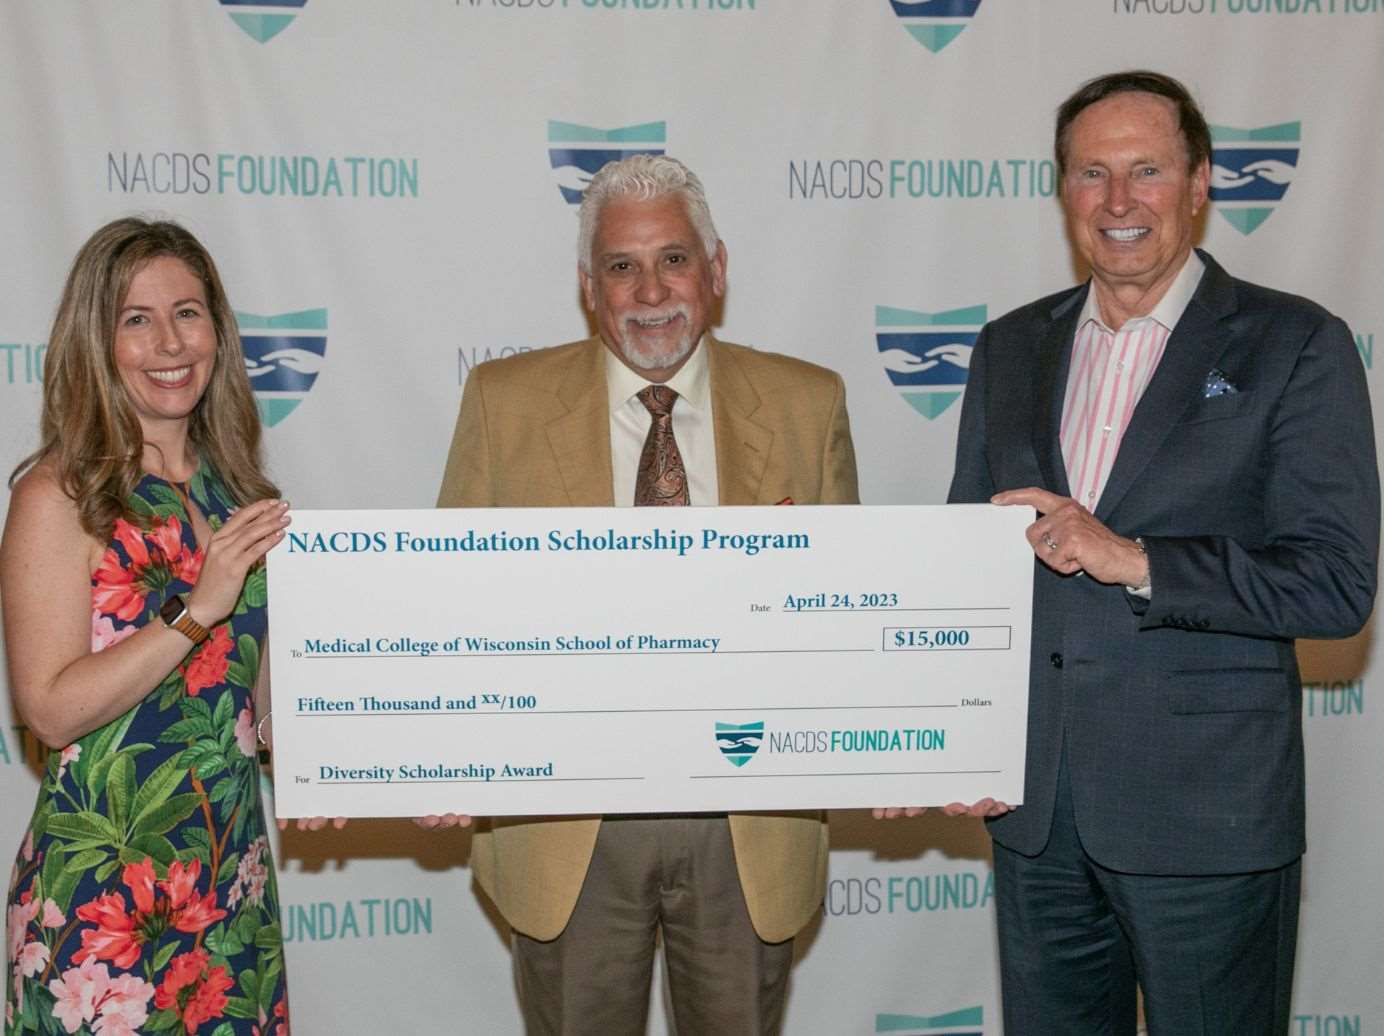 MCW School of Pharmacy receives NACDS Foundation Scholarship to launch career exploration program